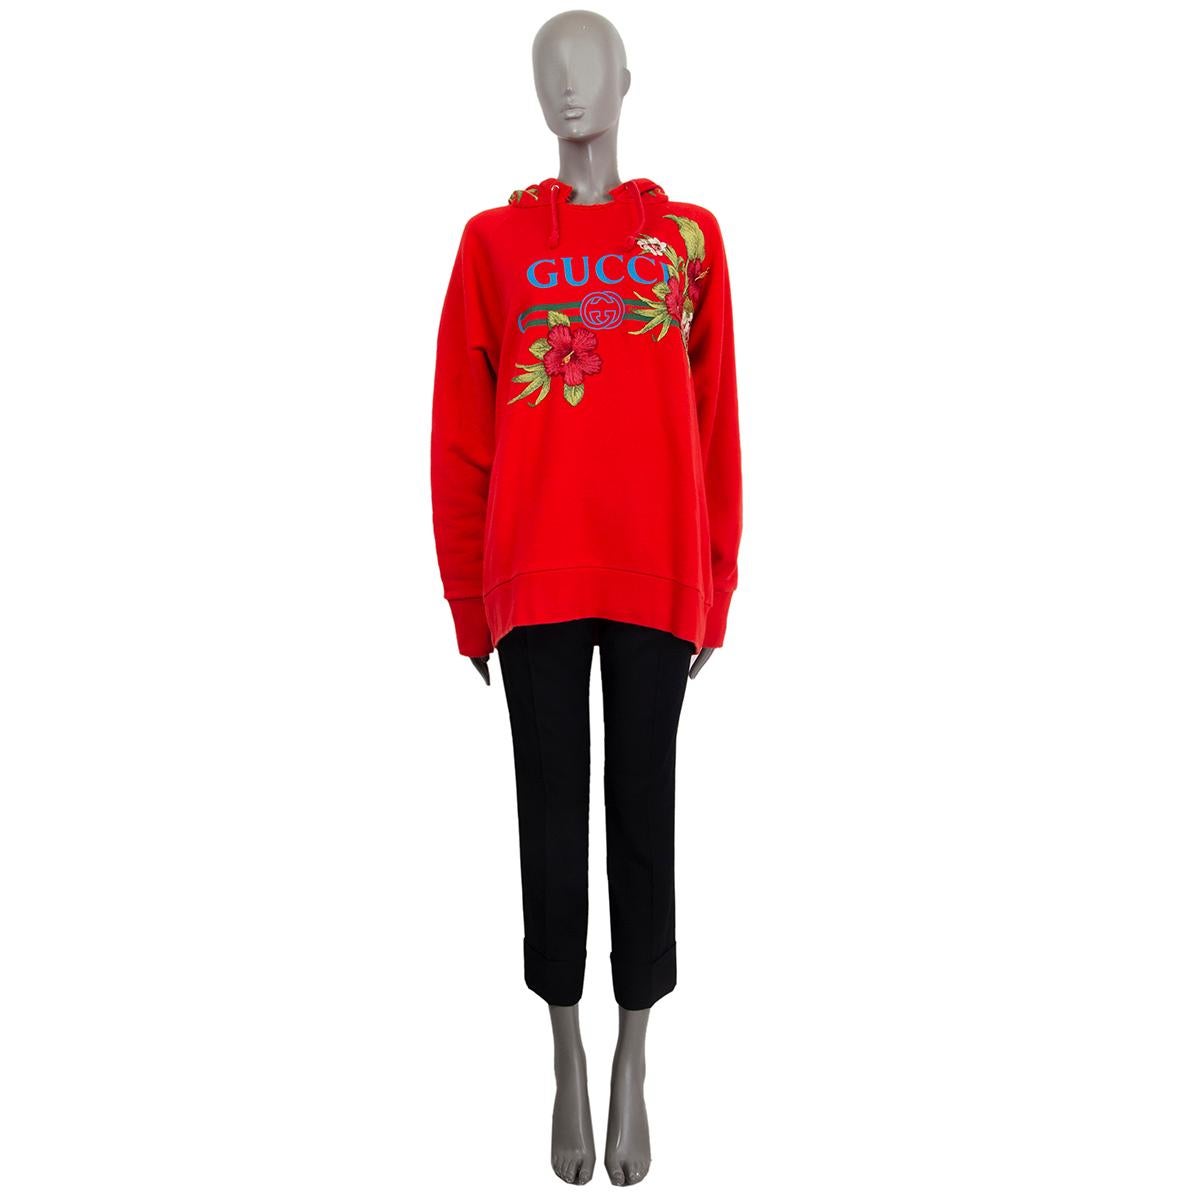 Gucci oversized, distressed printed hoodie sweater in red cotton jersey (100%) with hibiscus flower embroidered at front and hood. Has been worn and is in excellent condition. 

Tag Size M
Size M
Bust 128cm (49.9in)
Waist 122cm (47.6in)
Hips 114cm